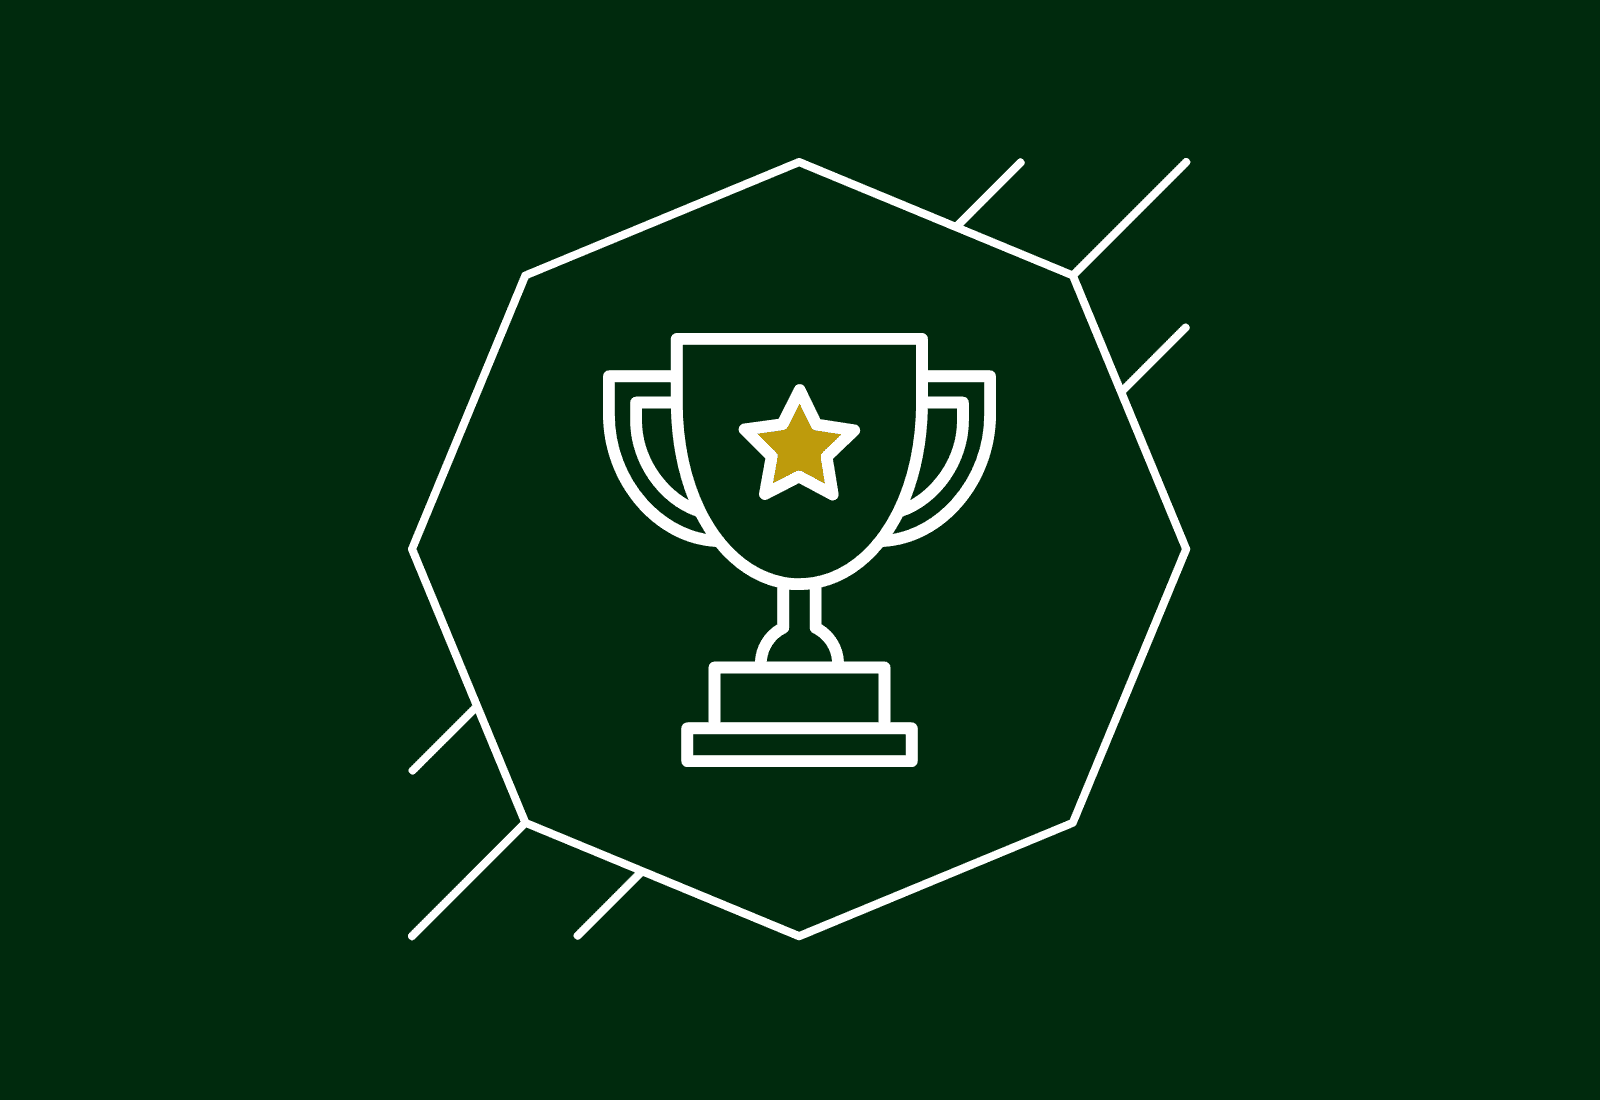 graphic of a trophy inside an octagon outline